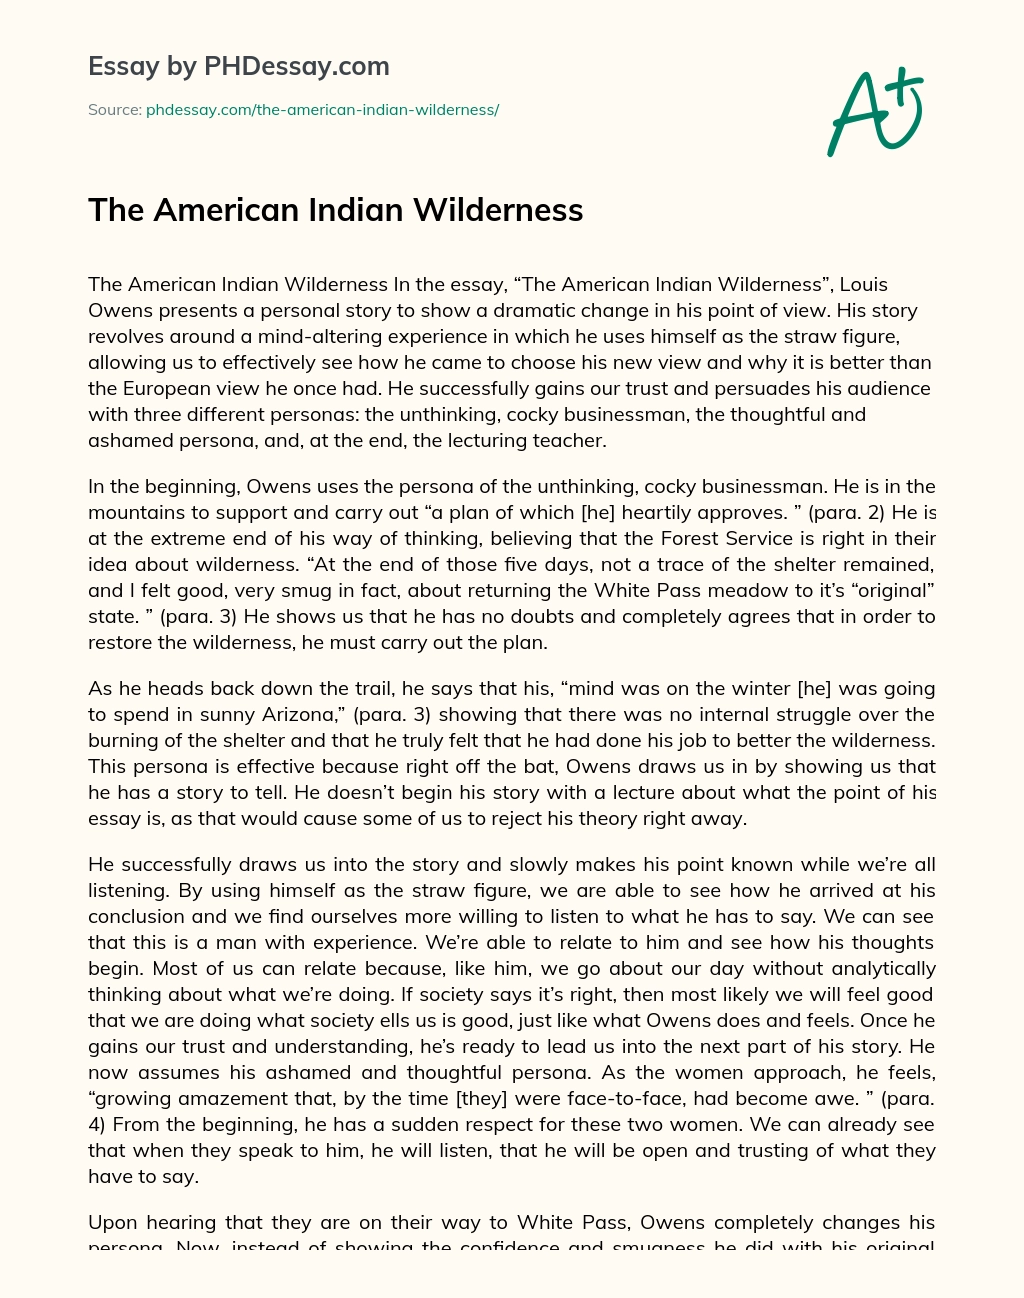 The American Indian Wilderness essay